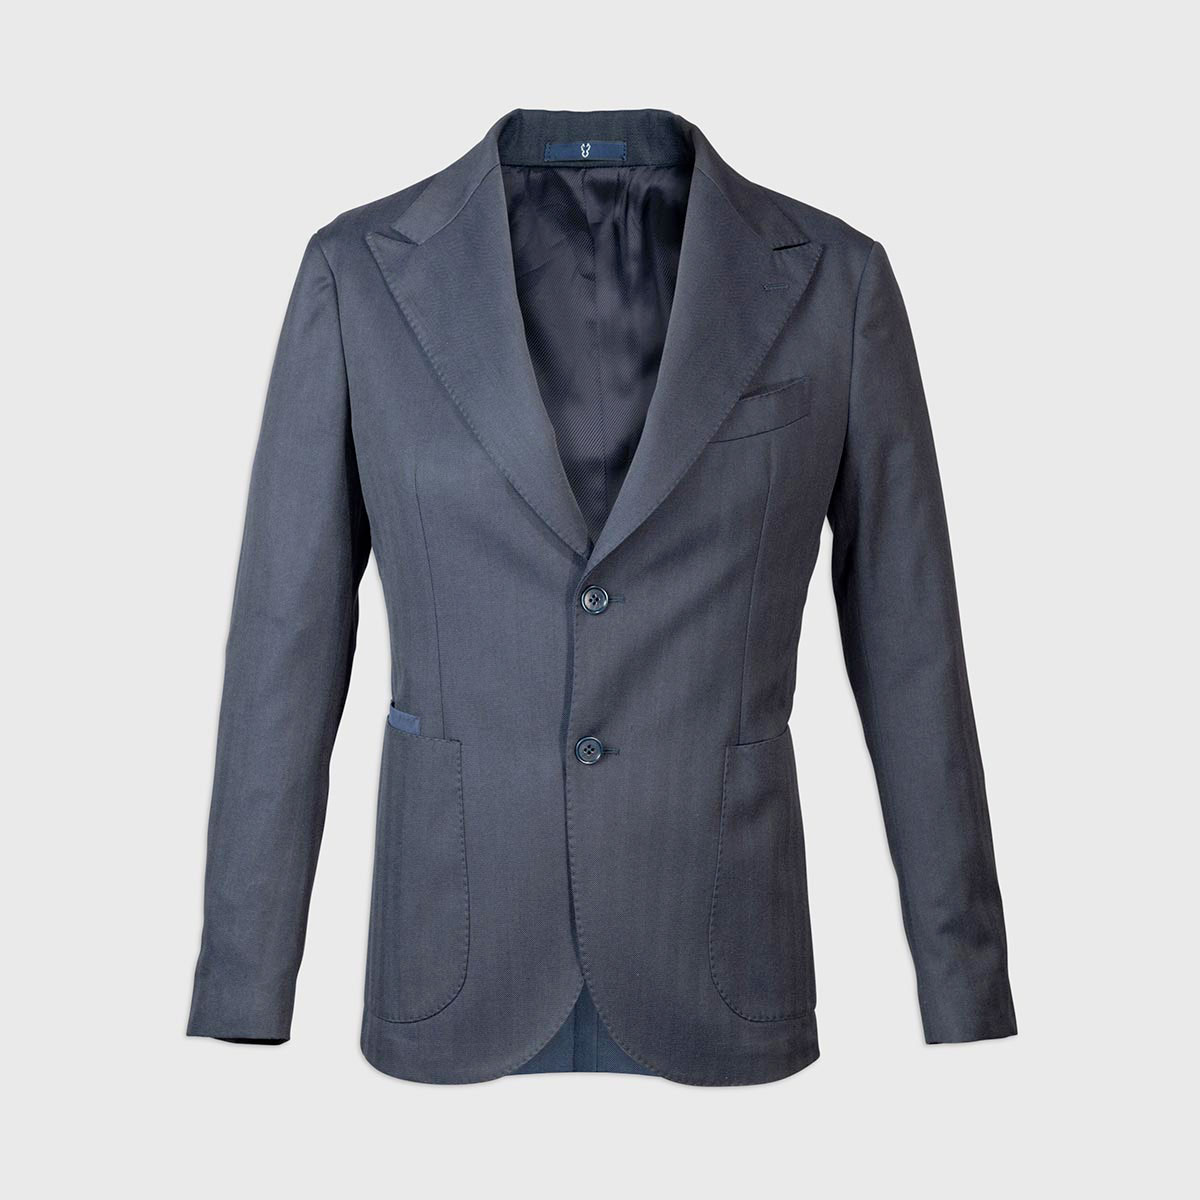 Half-lined single-breasted jacket in 130’S Wool- Blue Melillo 1970 on sale 2022